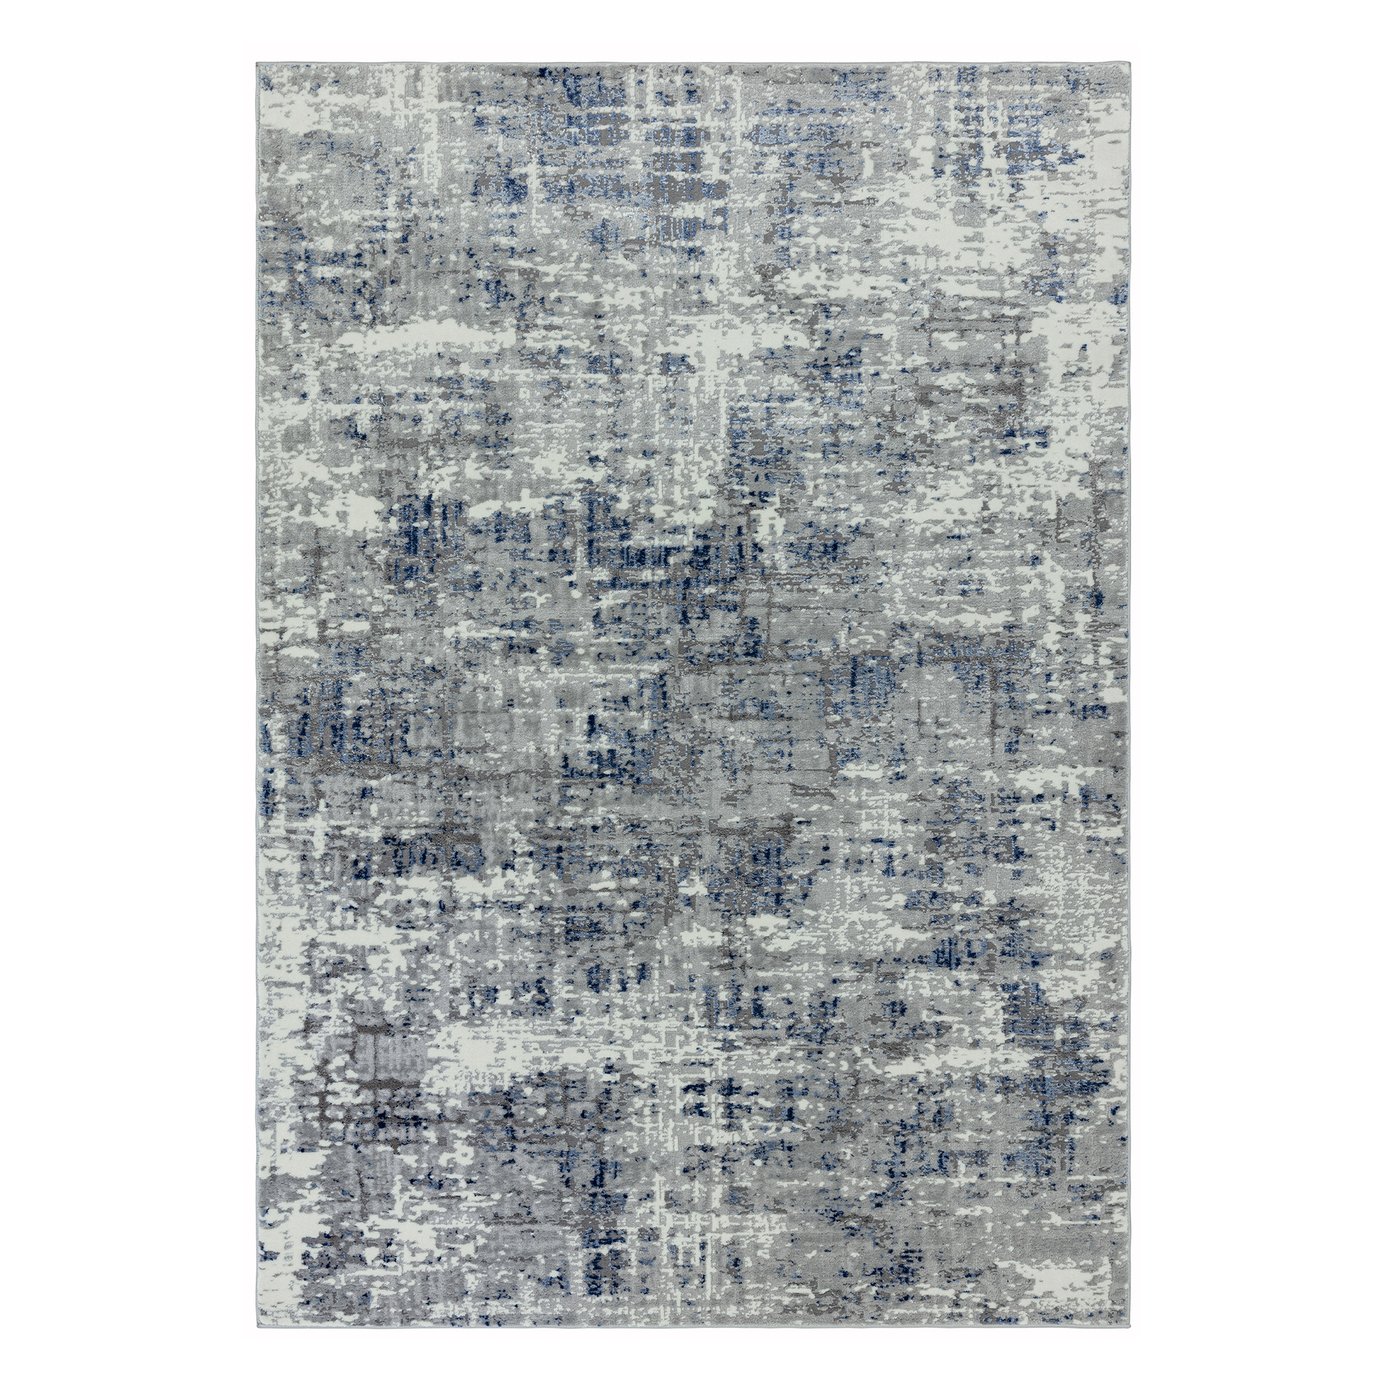 Asiatic Orion Shiny Rectangle Rug - 120x170cm - Blue & Grey